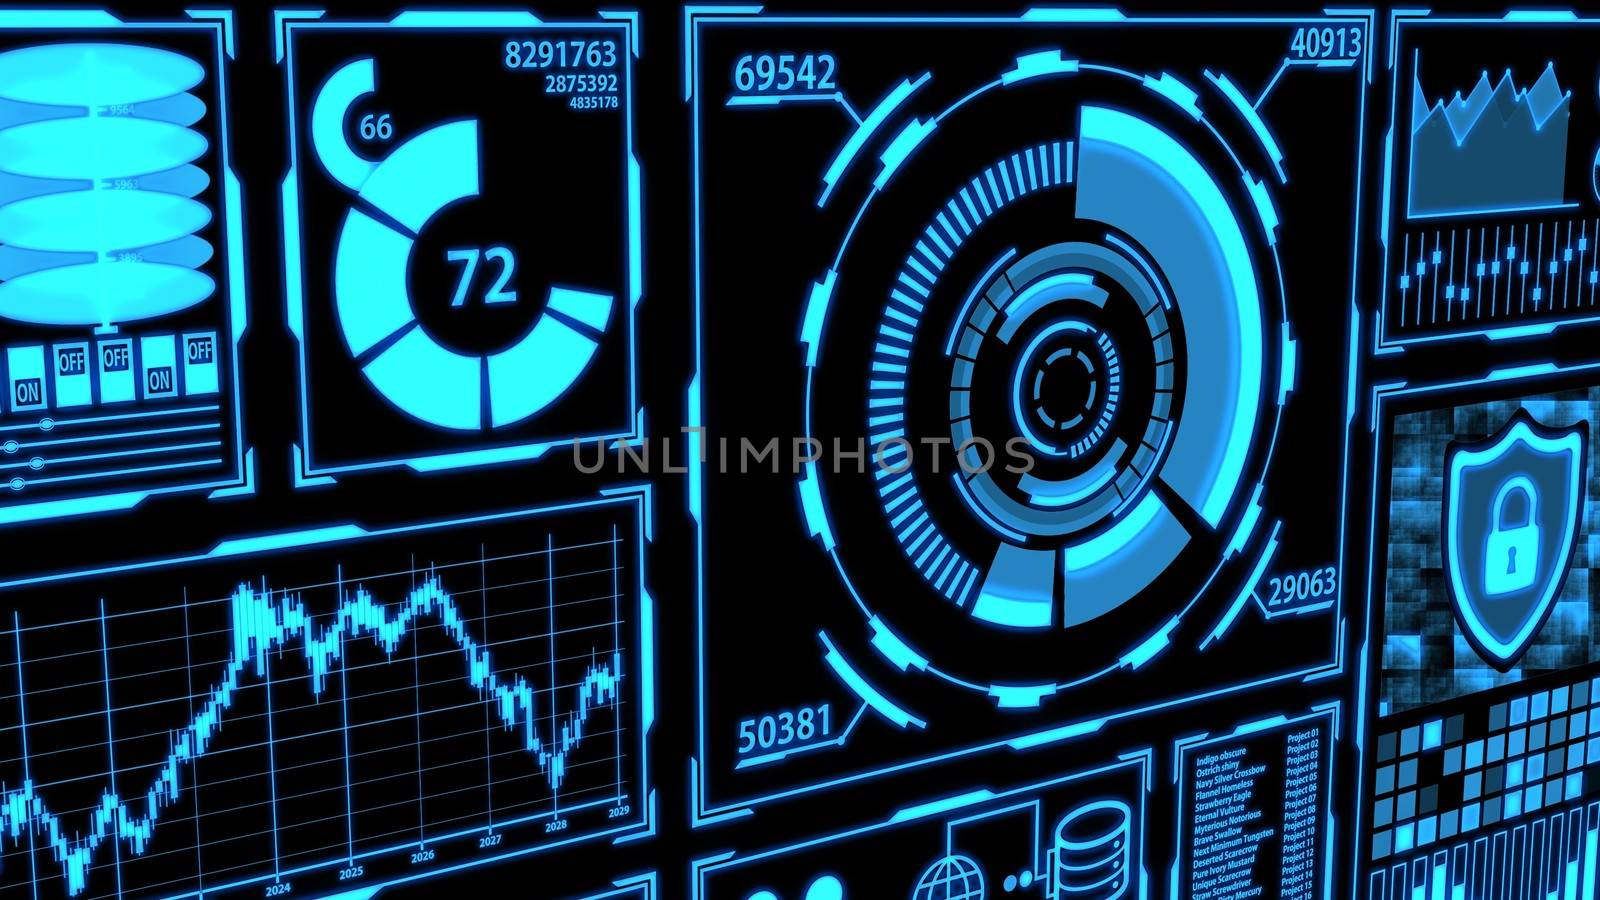 Data Transfer, Transmission and Digital Transformation Screen HUD with Details in Blue color theme including Digital elements Ver.2 (Different angle)